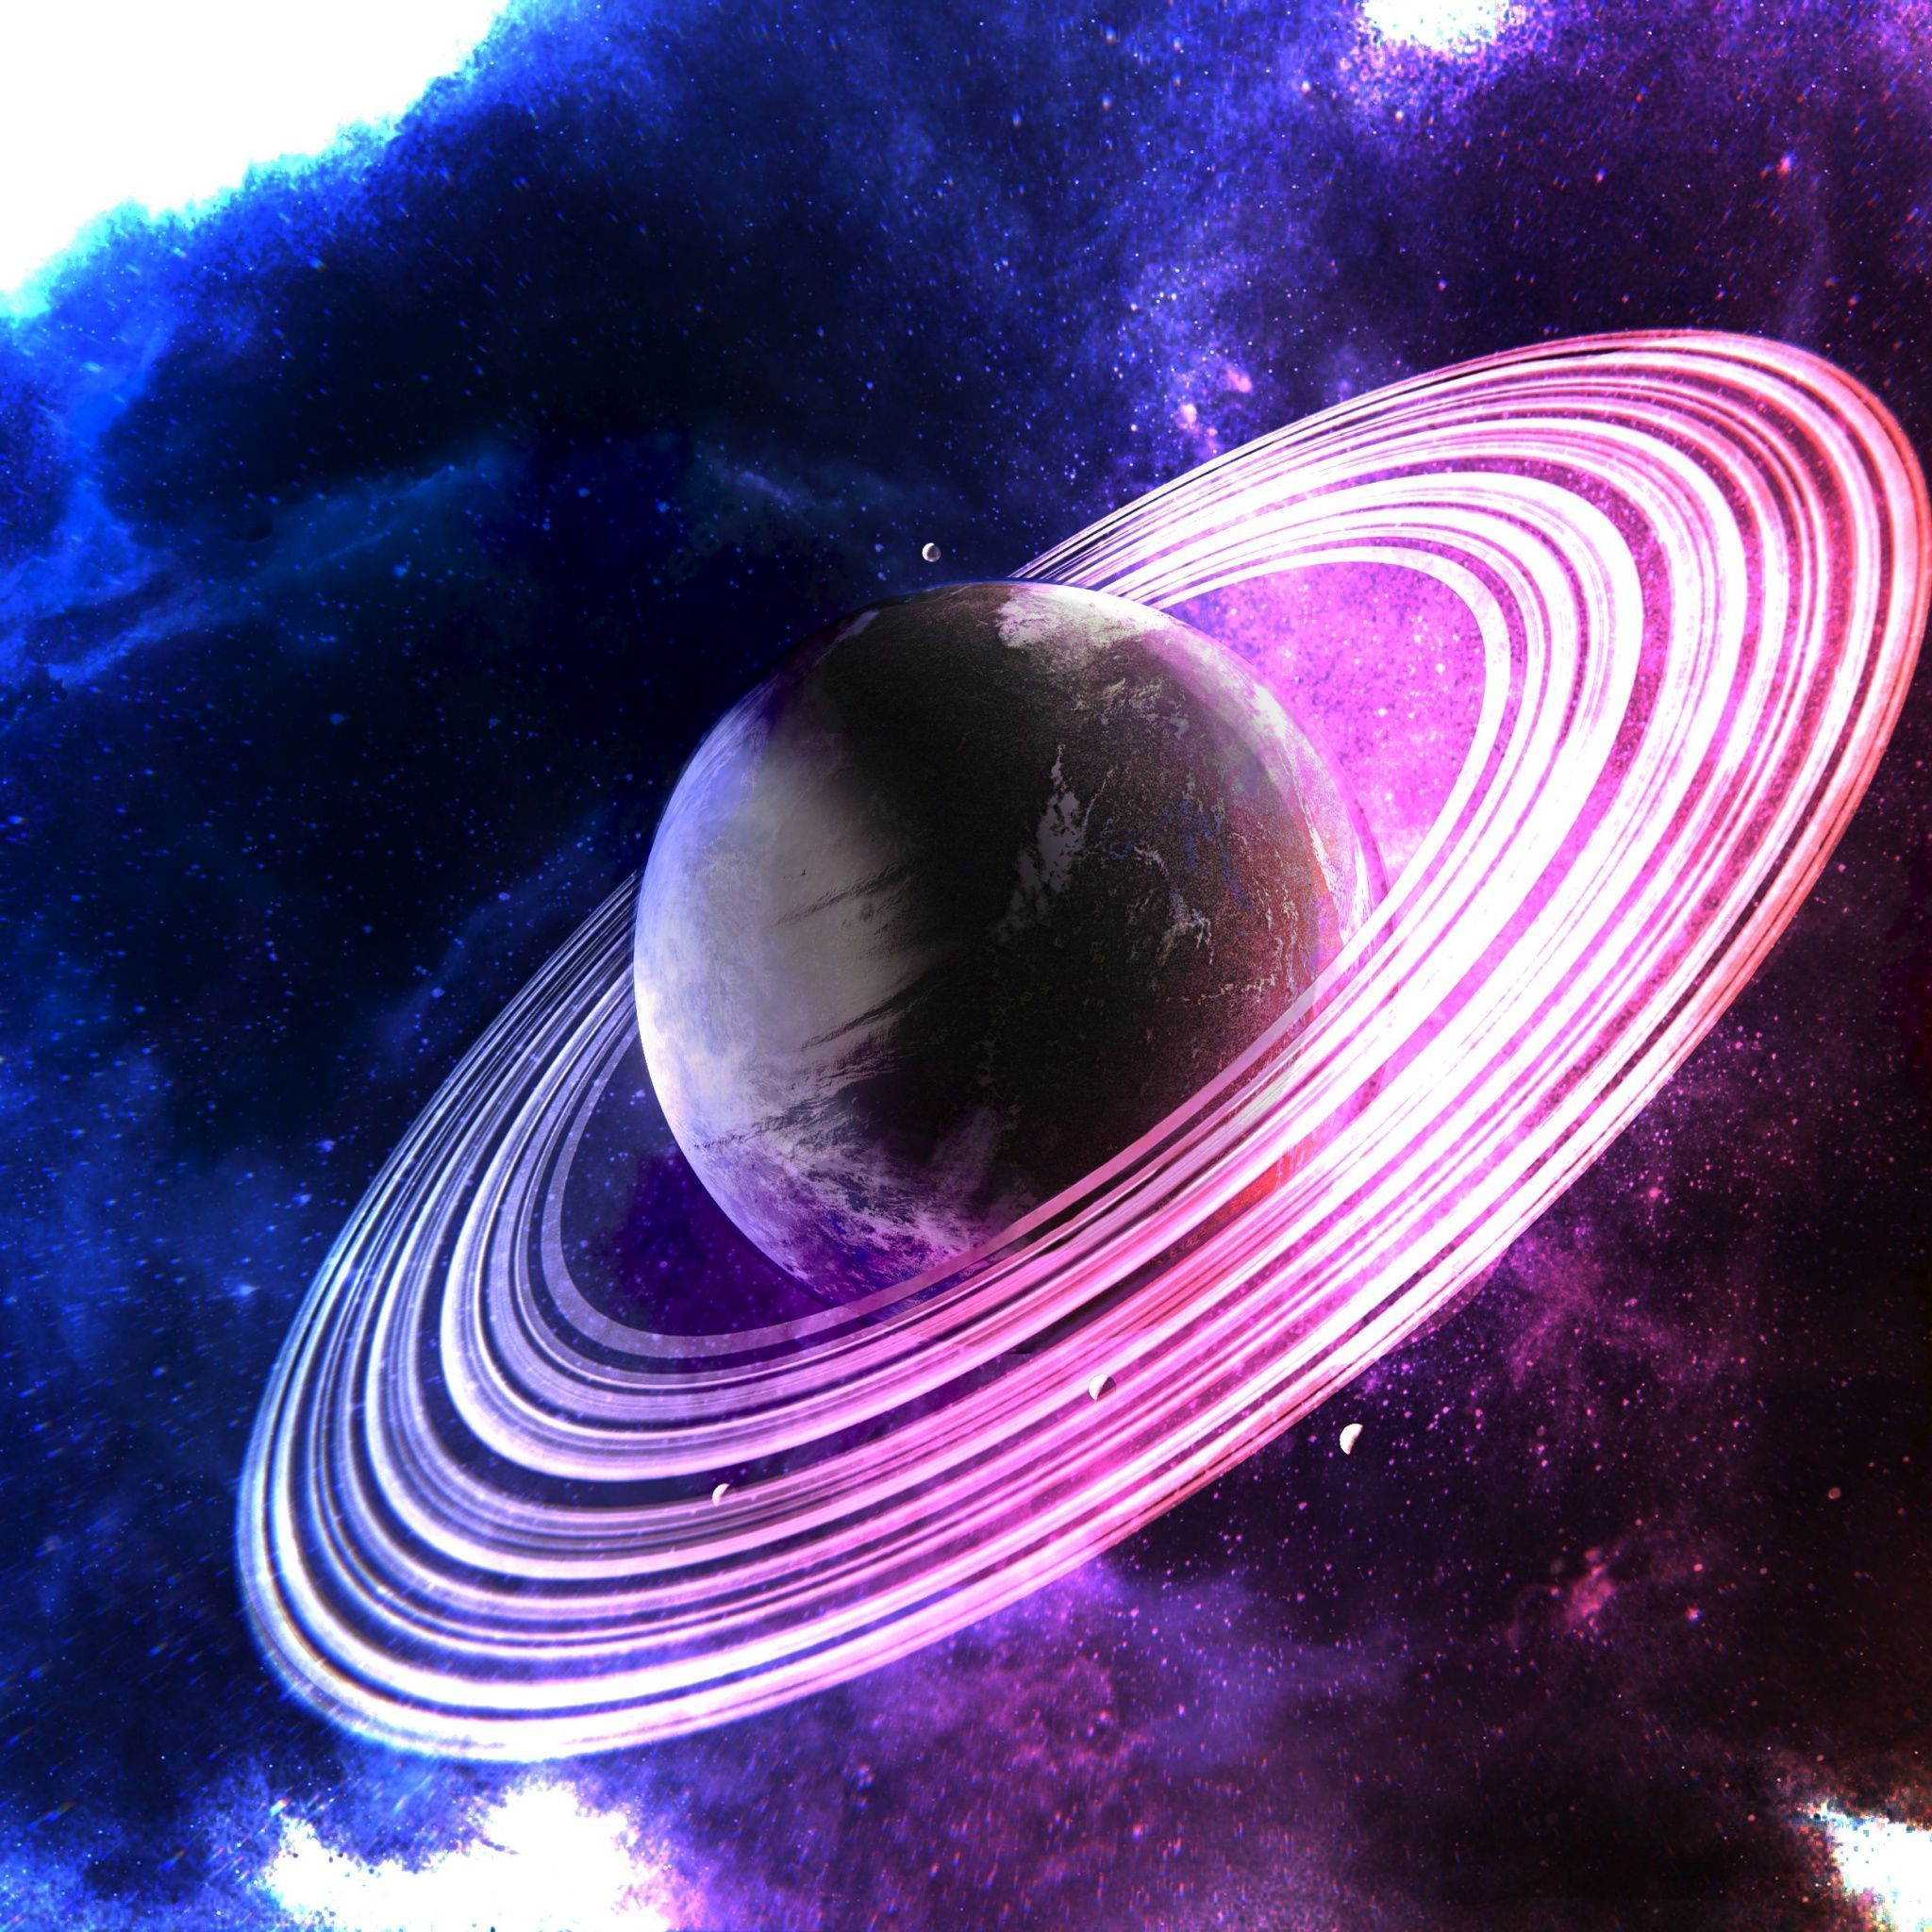 A planet with rings and stars in the background - Saturn